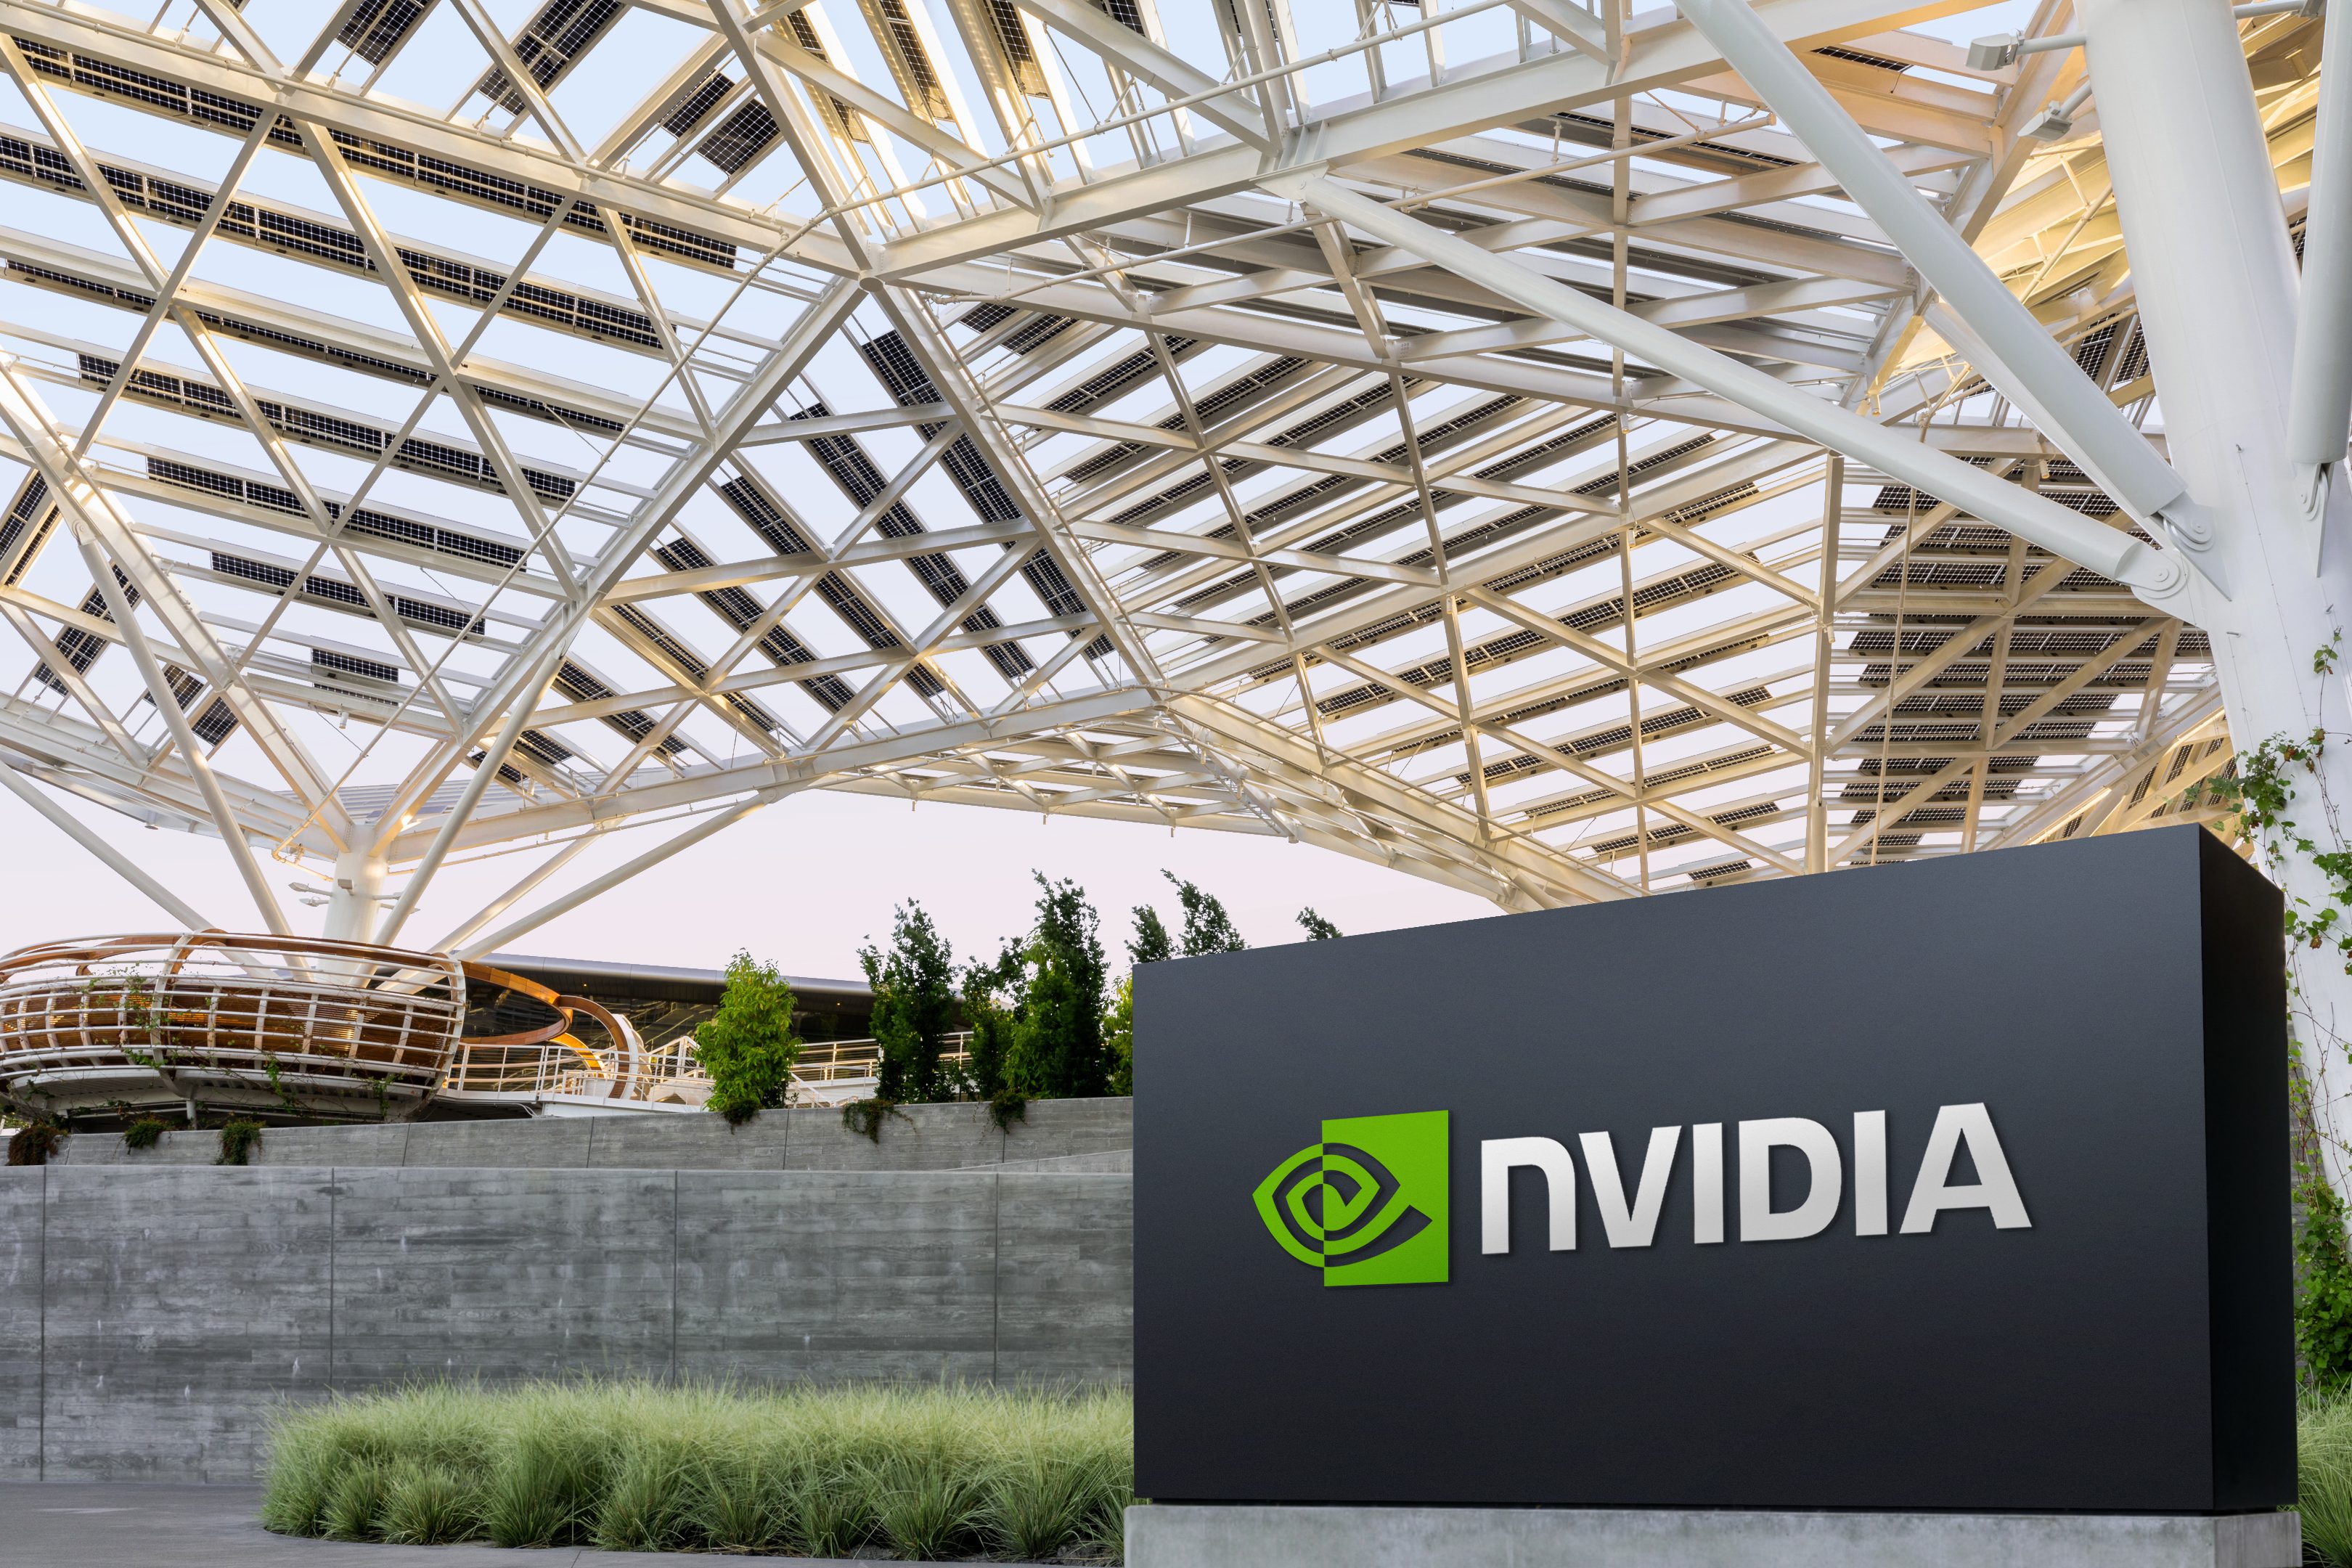 Nvidia’s strong earnings highlight AI’s rapid incursion across industries